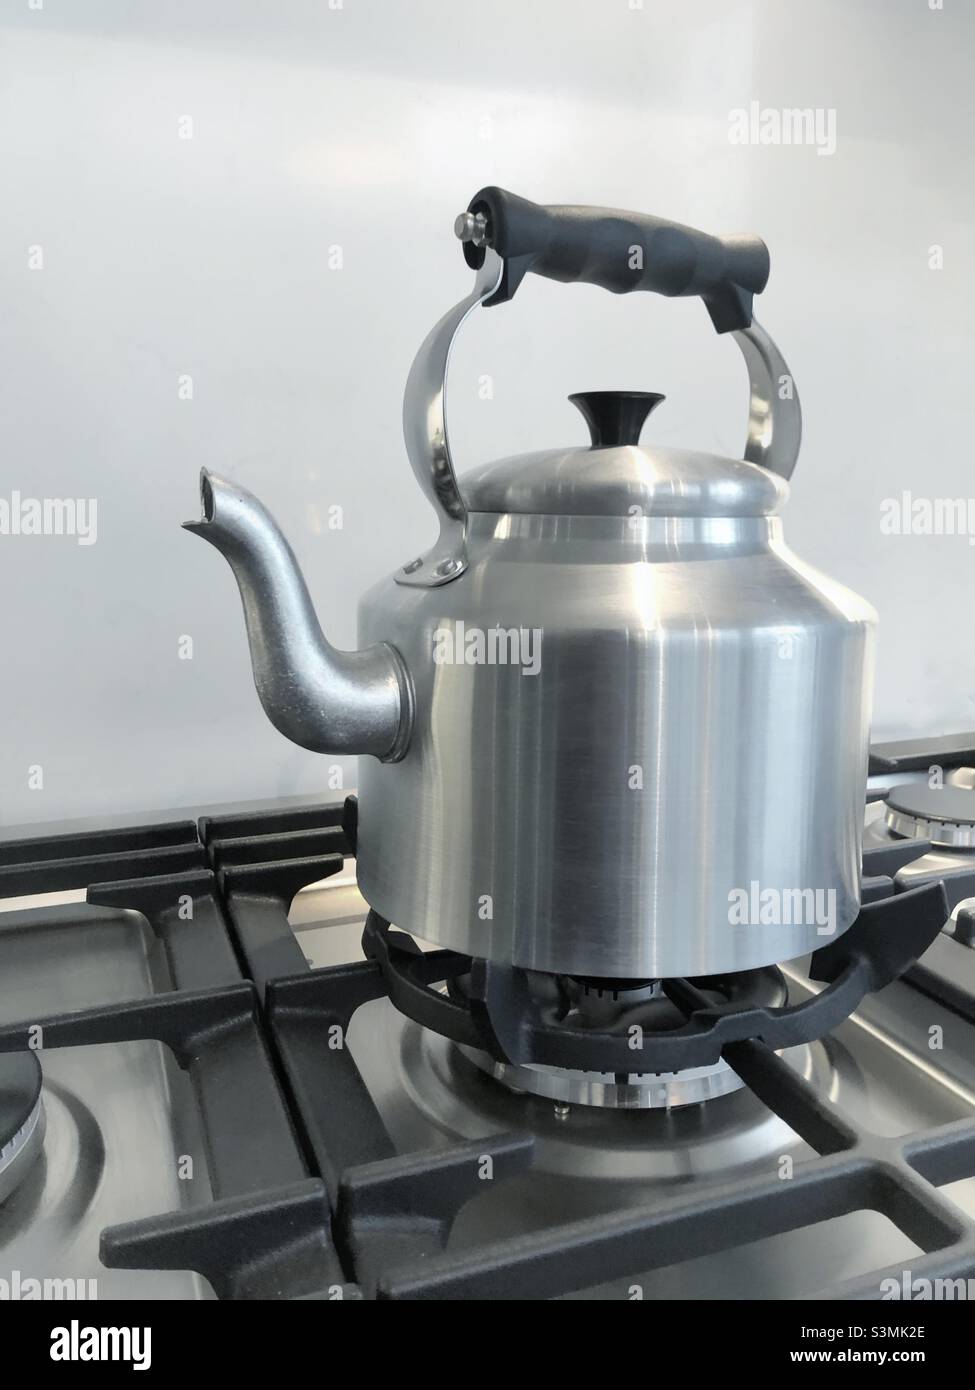 https://c8.alamy.com/comp/S3MK2E/he-large-silver-old-fashioned-kettle-with-handle-and-spout-on-a-gas-stove-boiling-water-for-hot-drinks-S3MK2E.jpg